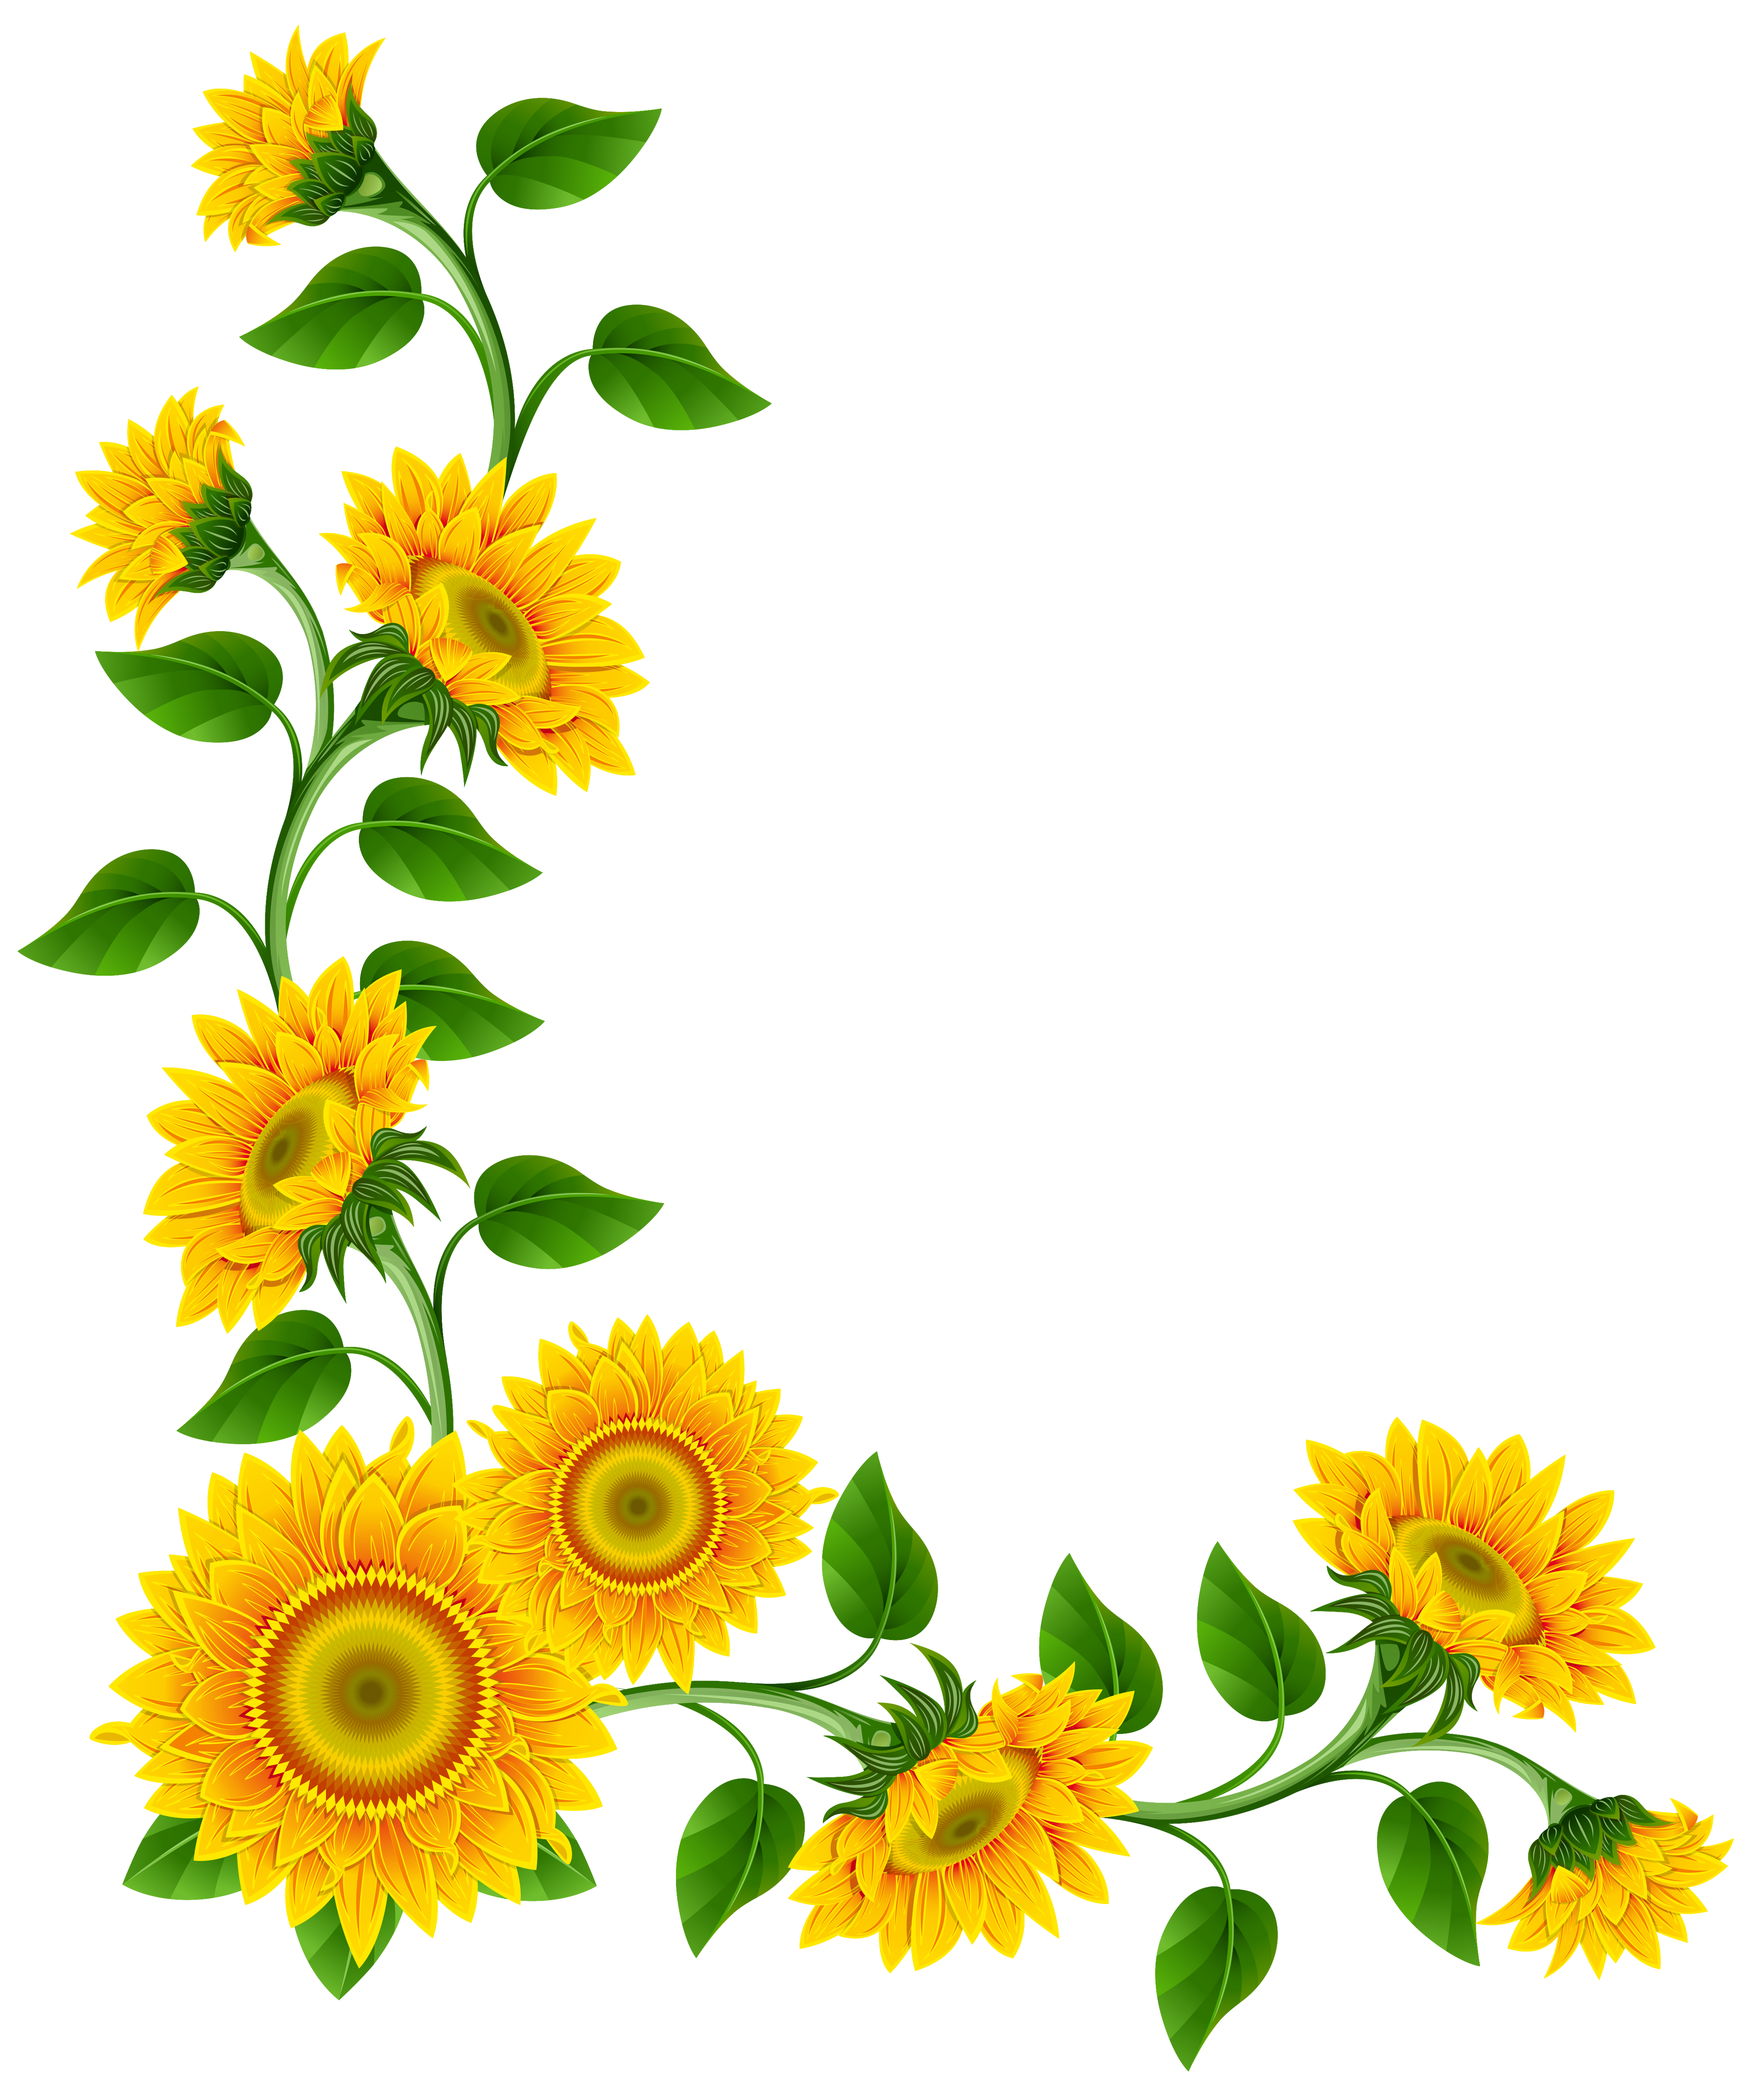 Download Sunflower Png Vector #28741 - Free Icons and PNG Backgrounds